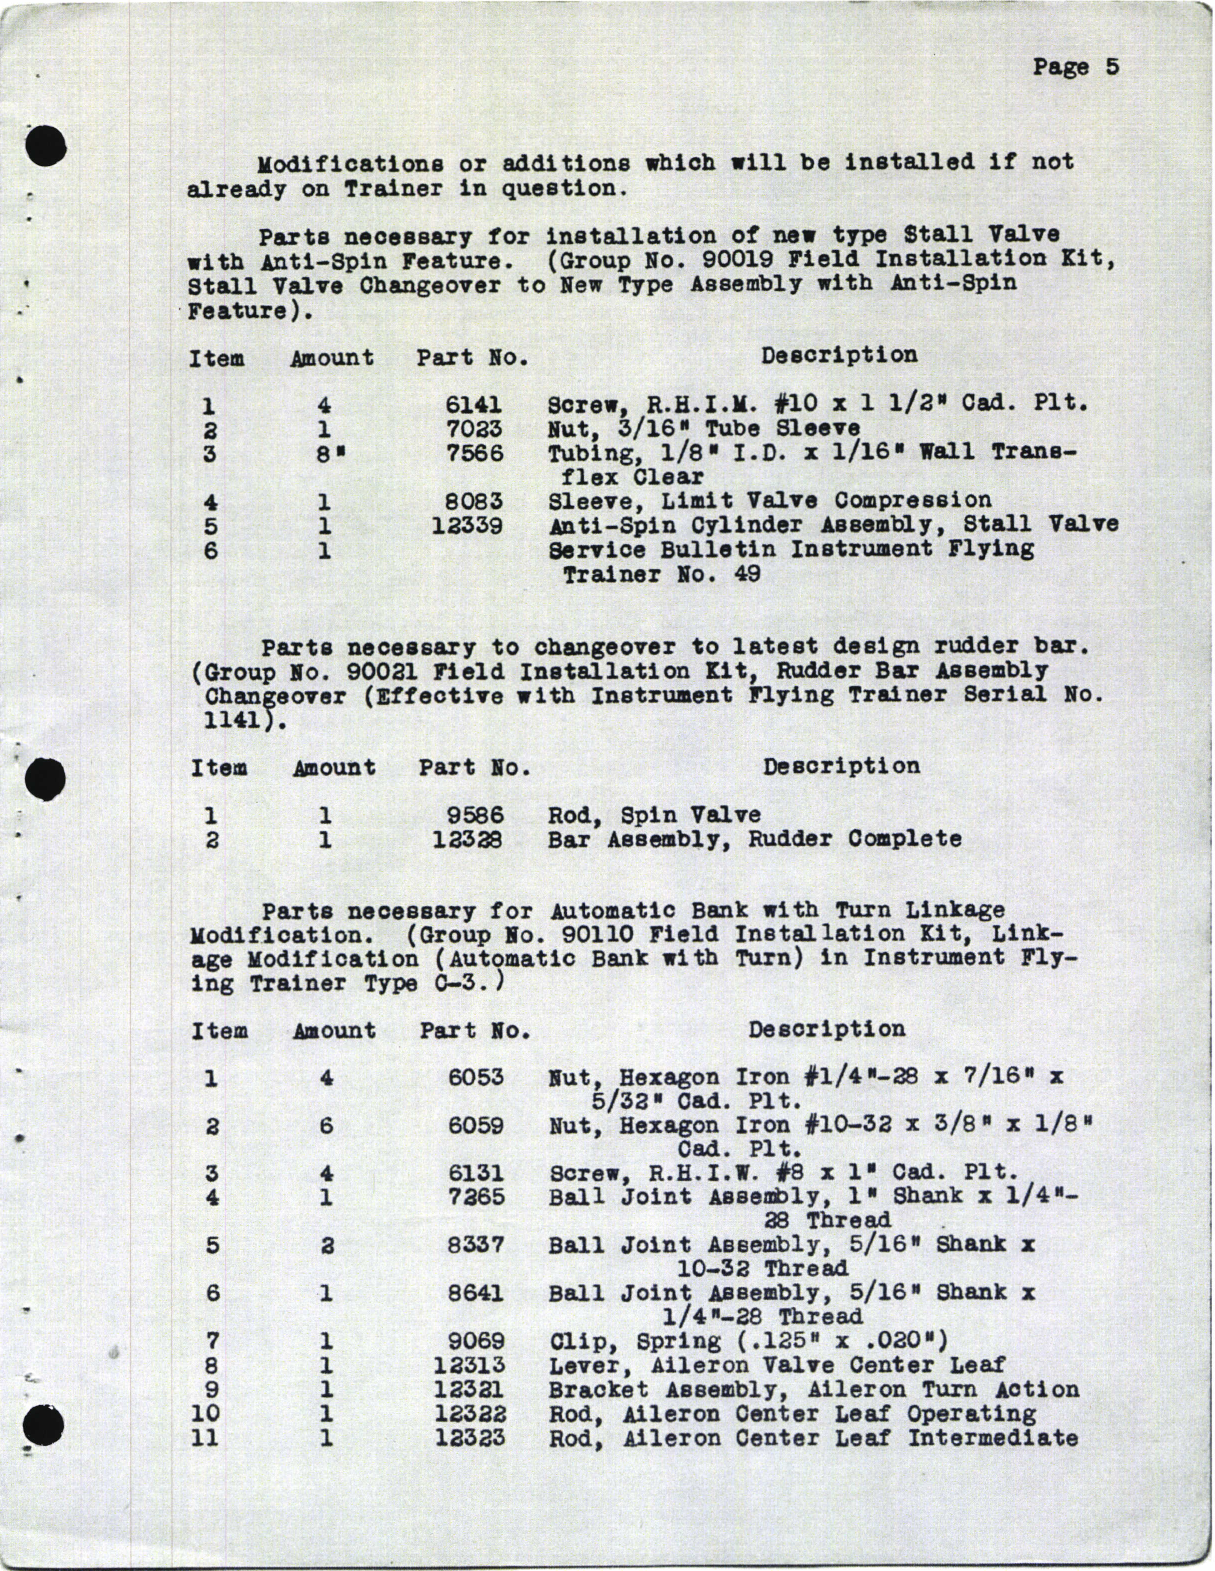 Sample page 7 from AirCorps Library document: Standard Field Overhaul Instructions for C-3 Trainer Models